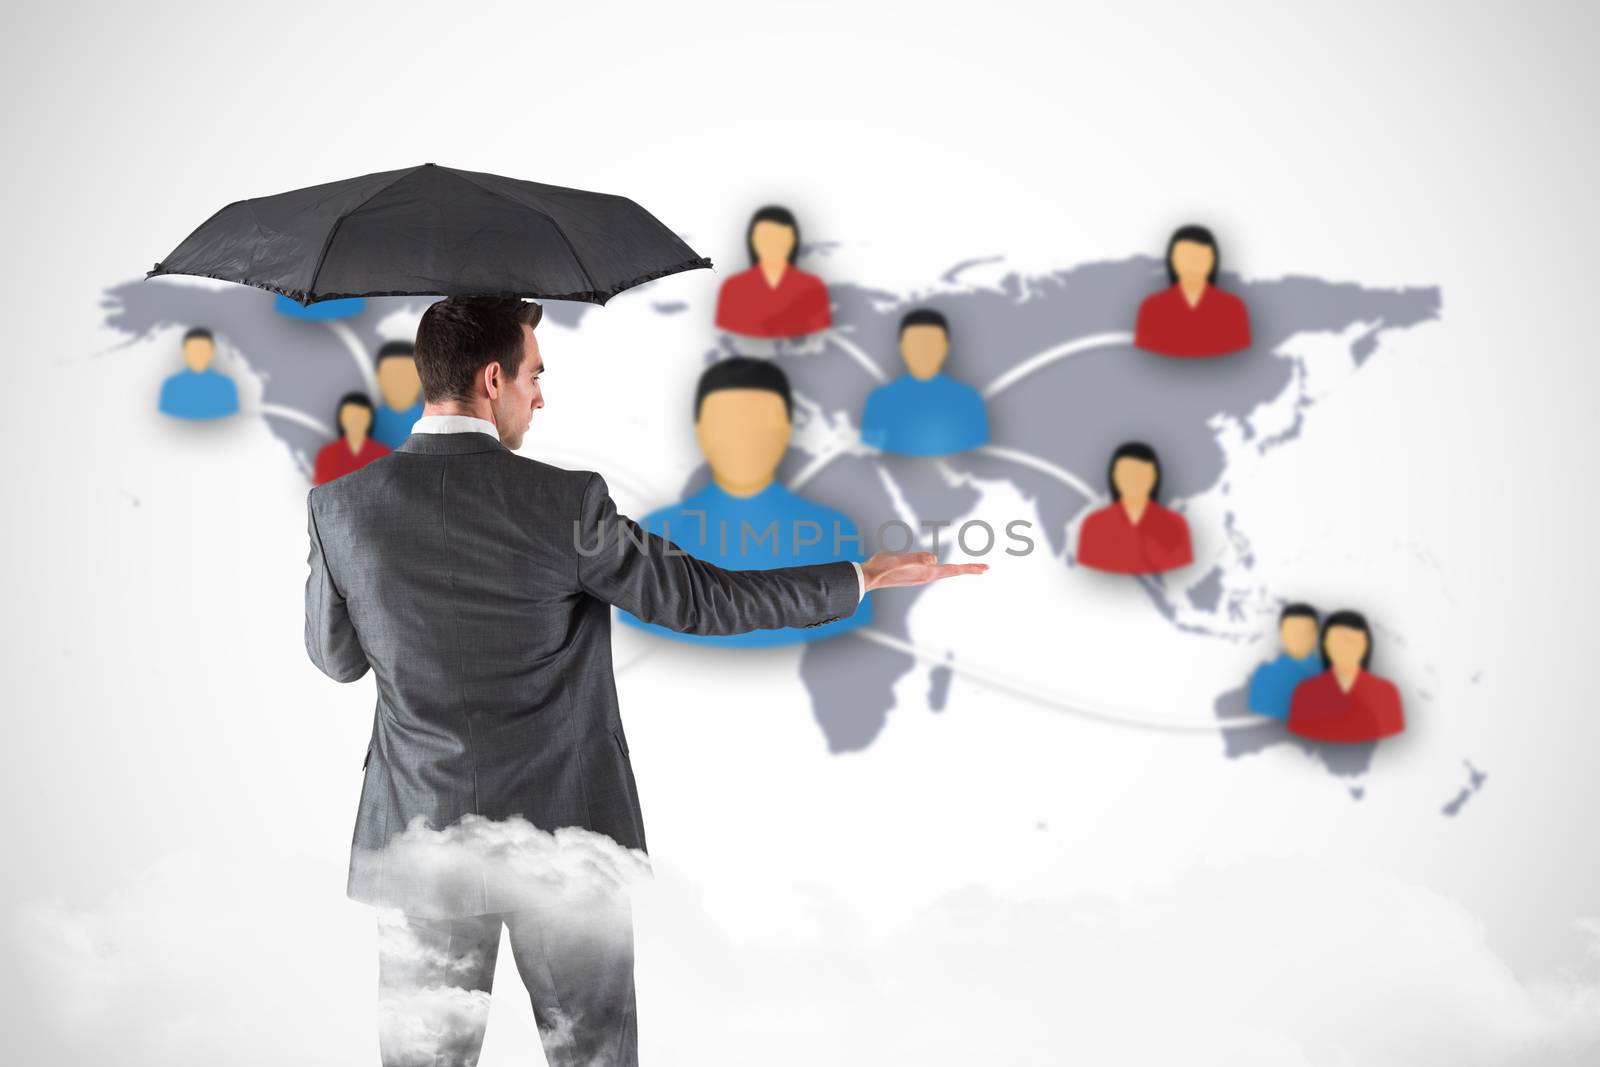 Composite image of businessman holding an umbrella with hand out by Wavebreakmedia